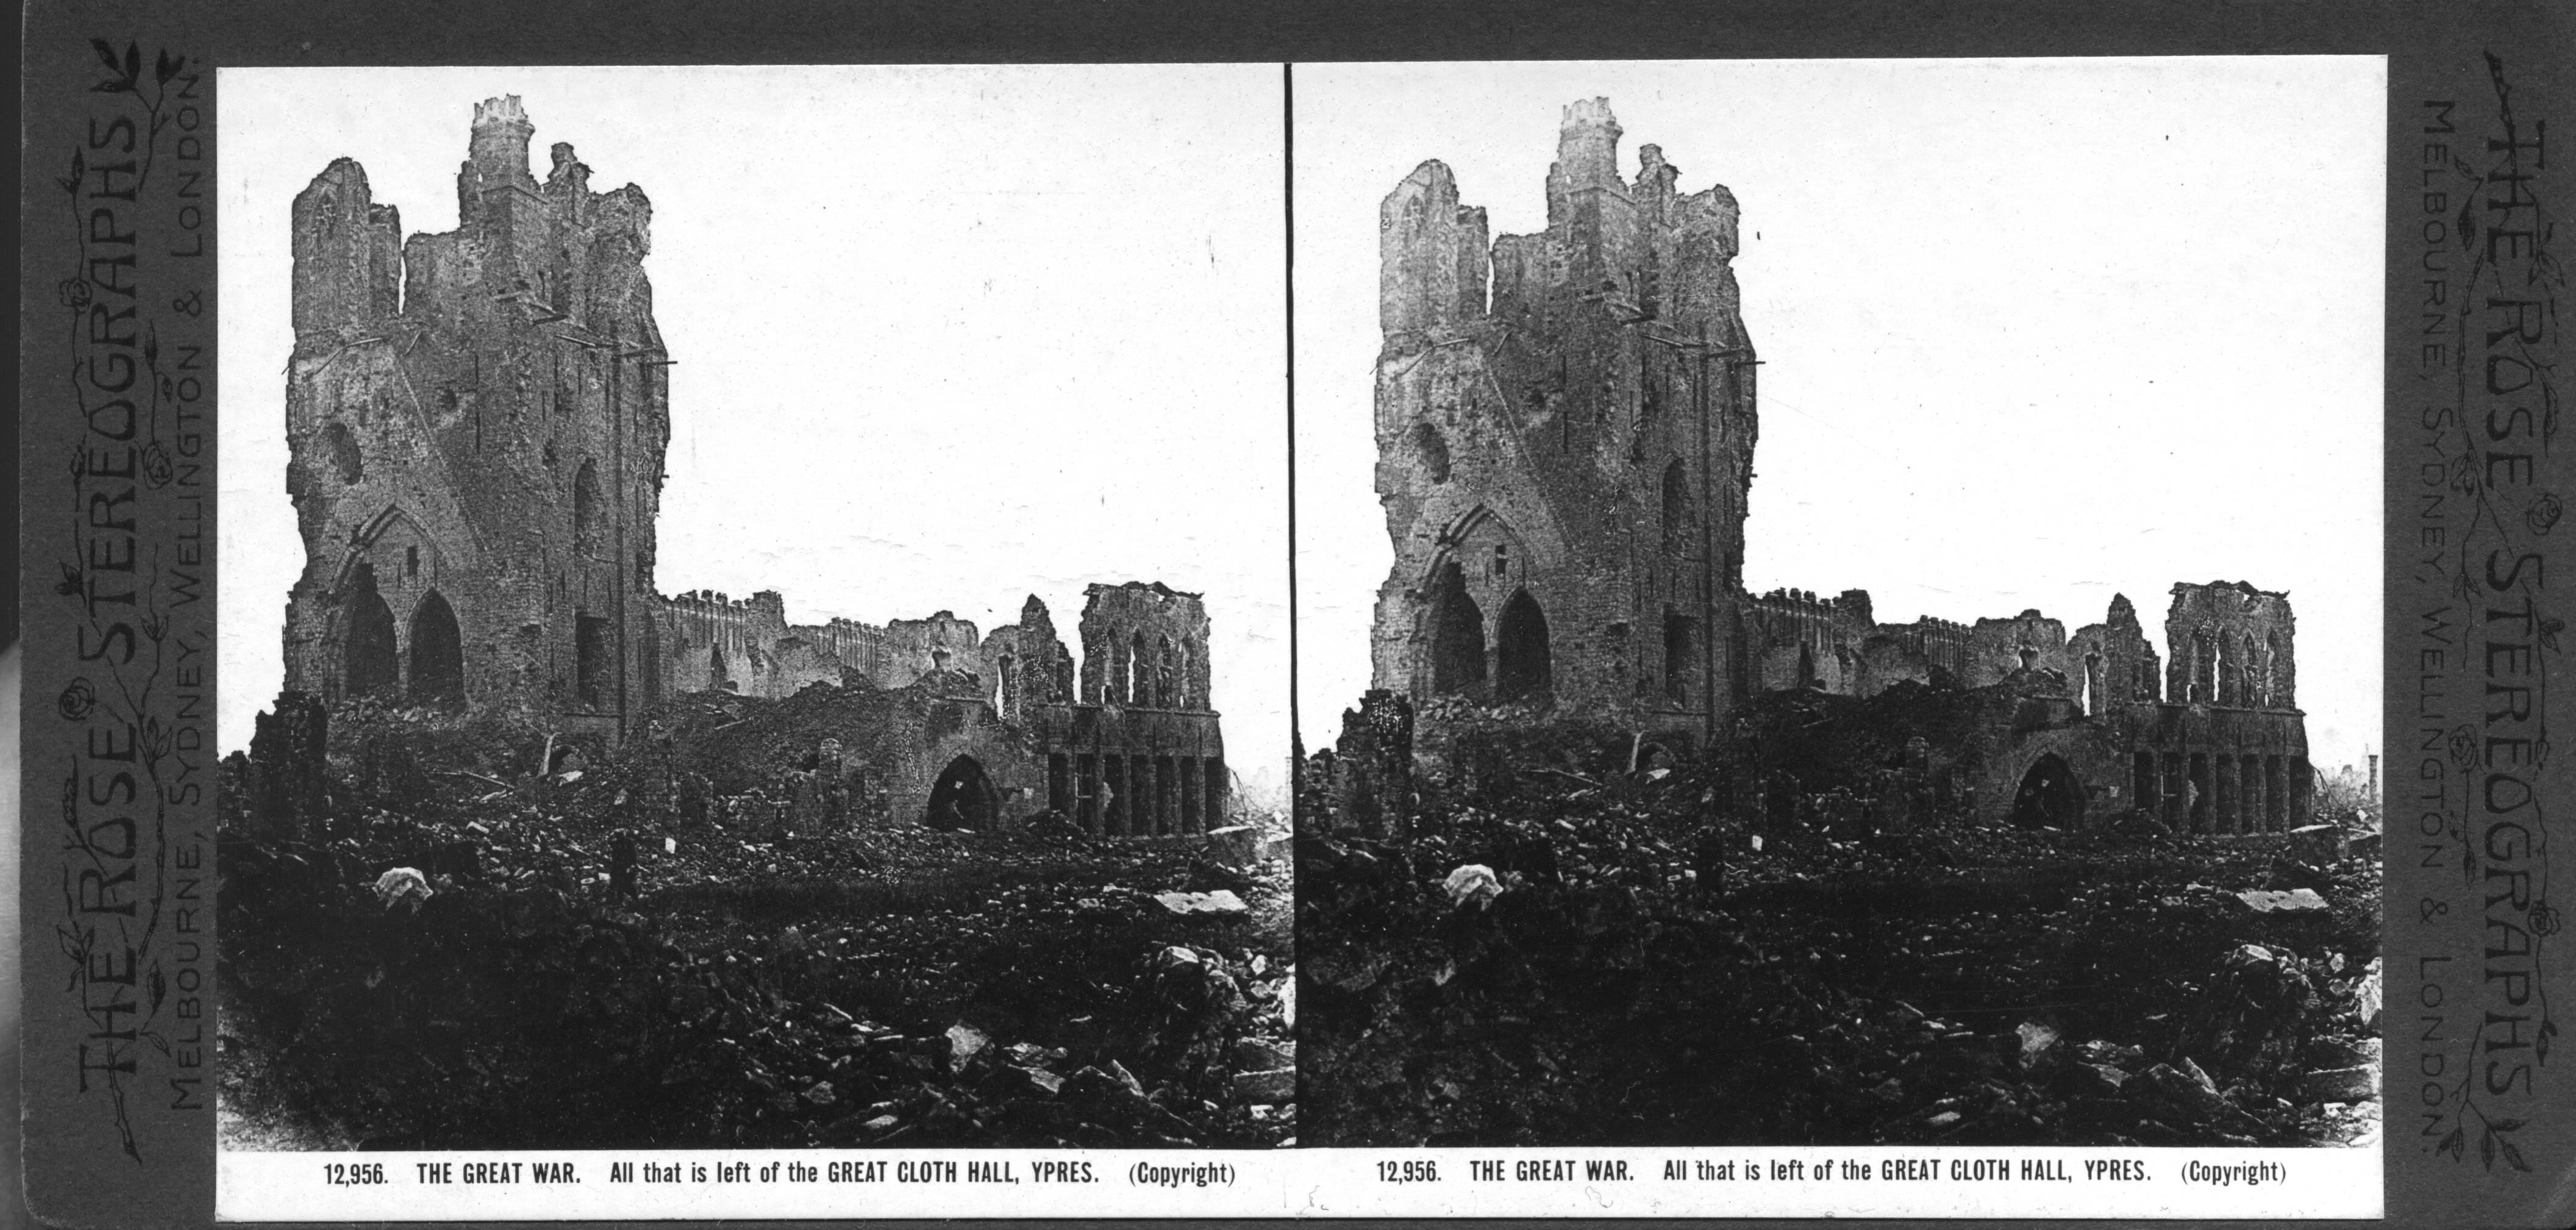 THE GREAT WAR. All that is left of the GREAT CLOTH HALL, YPRES.